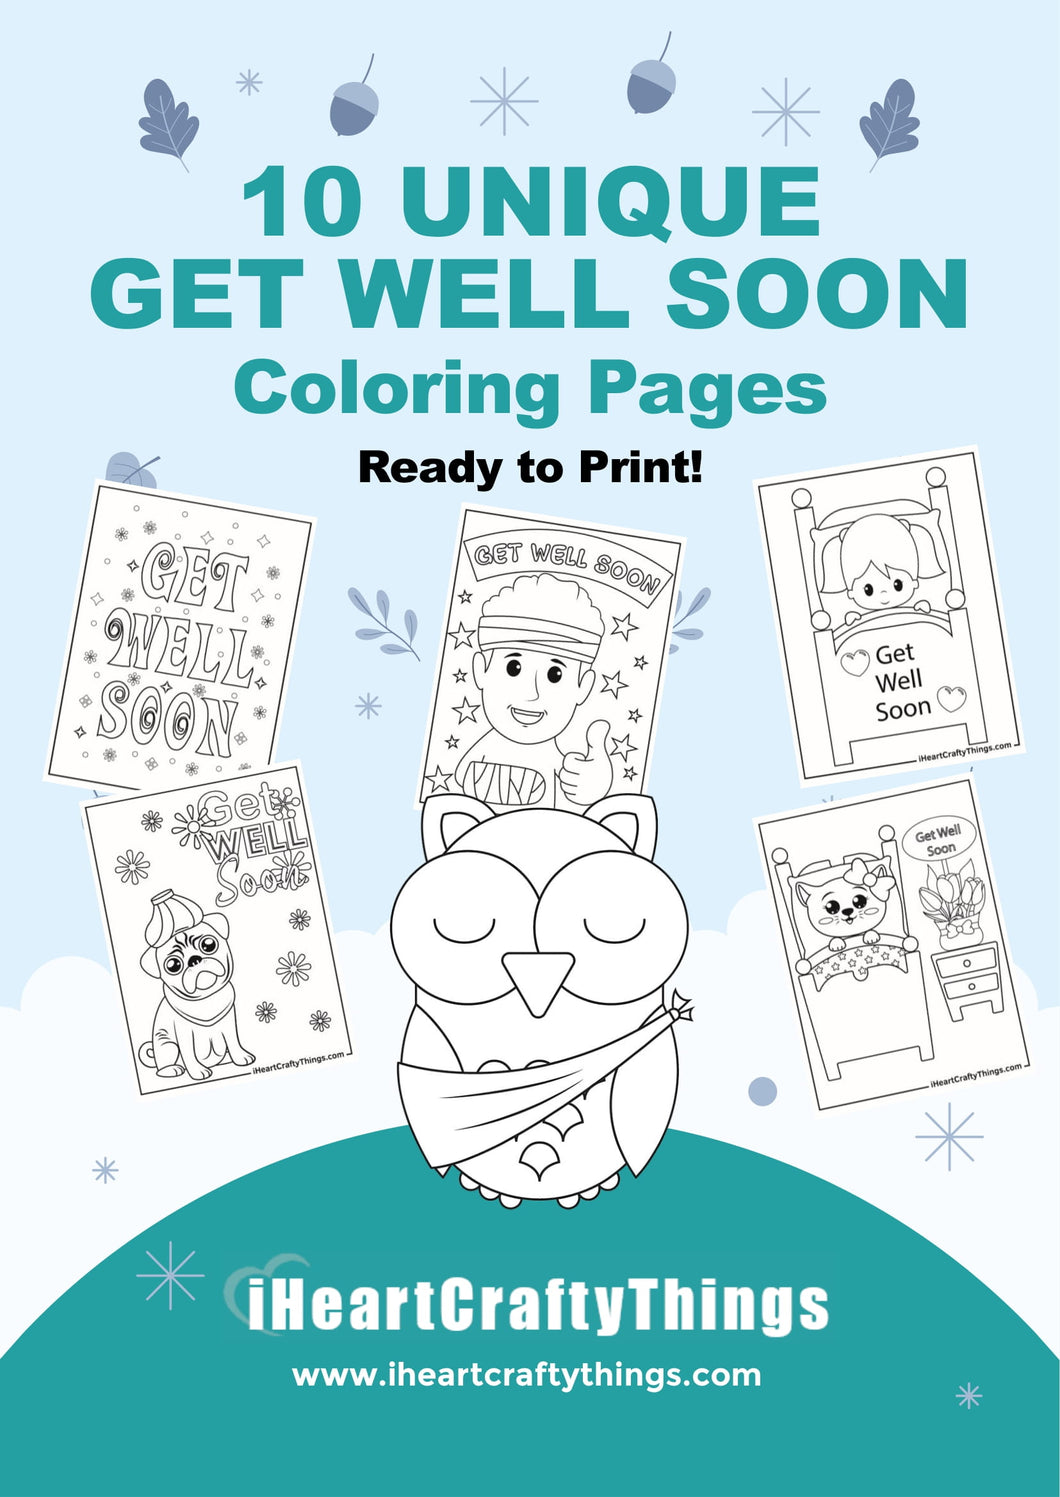 Get well soon coloring pages â i heart crafty things